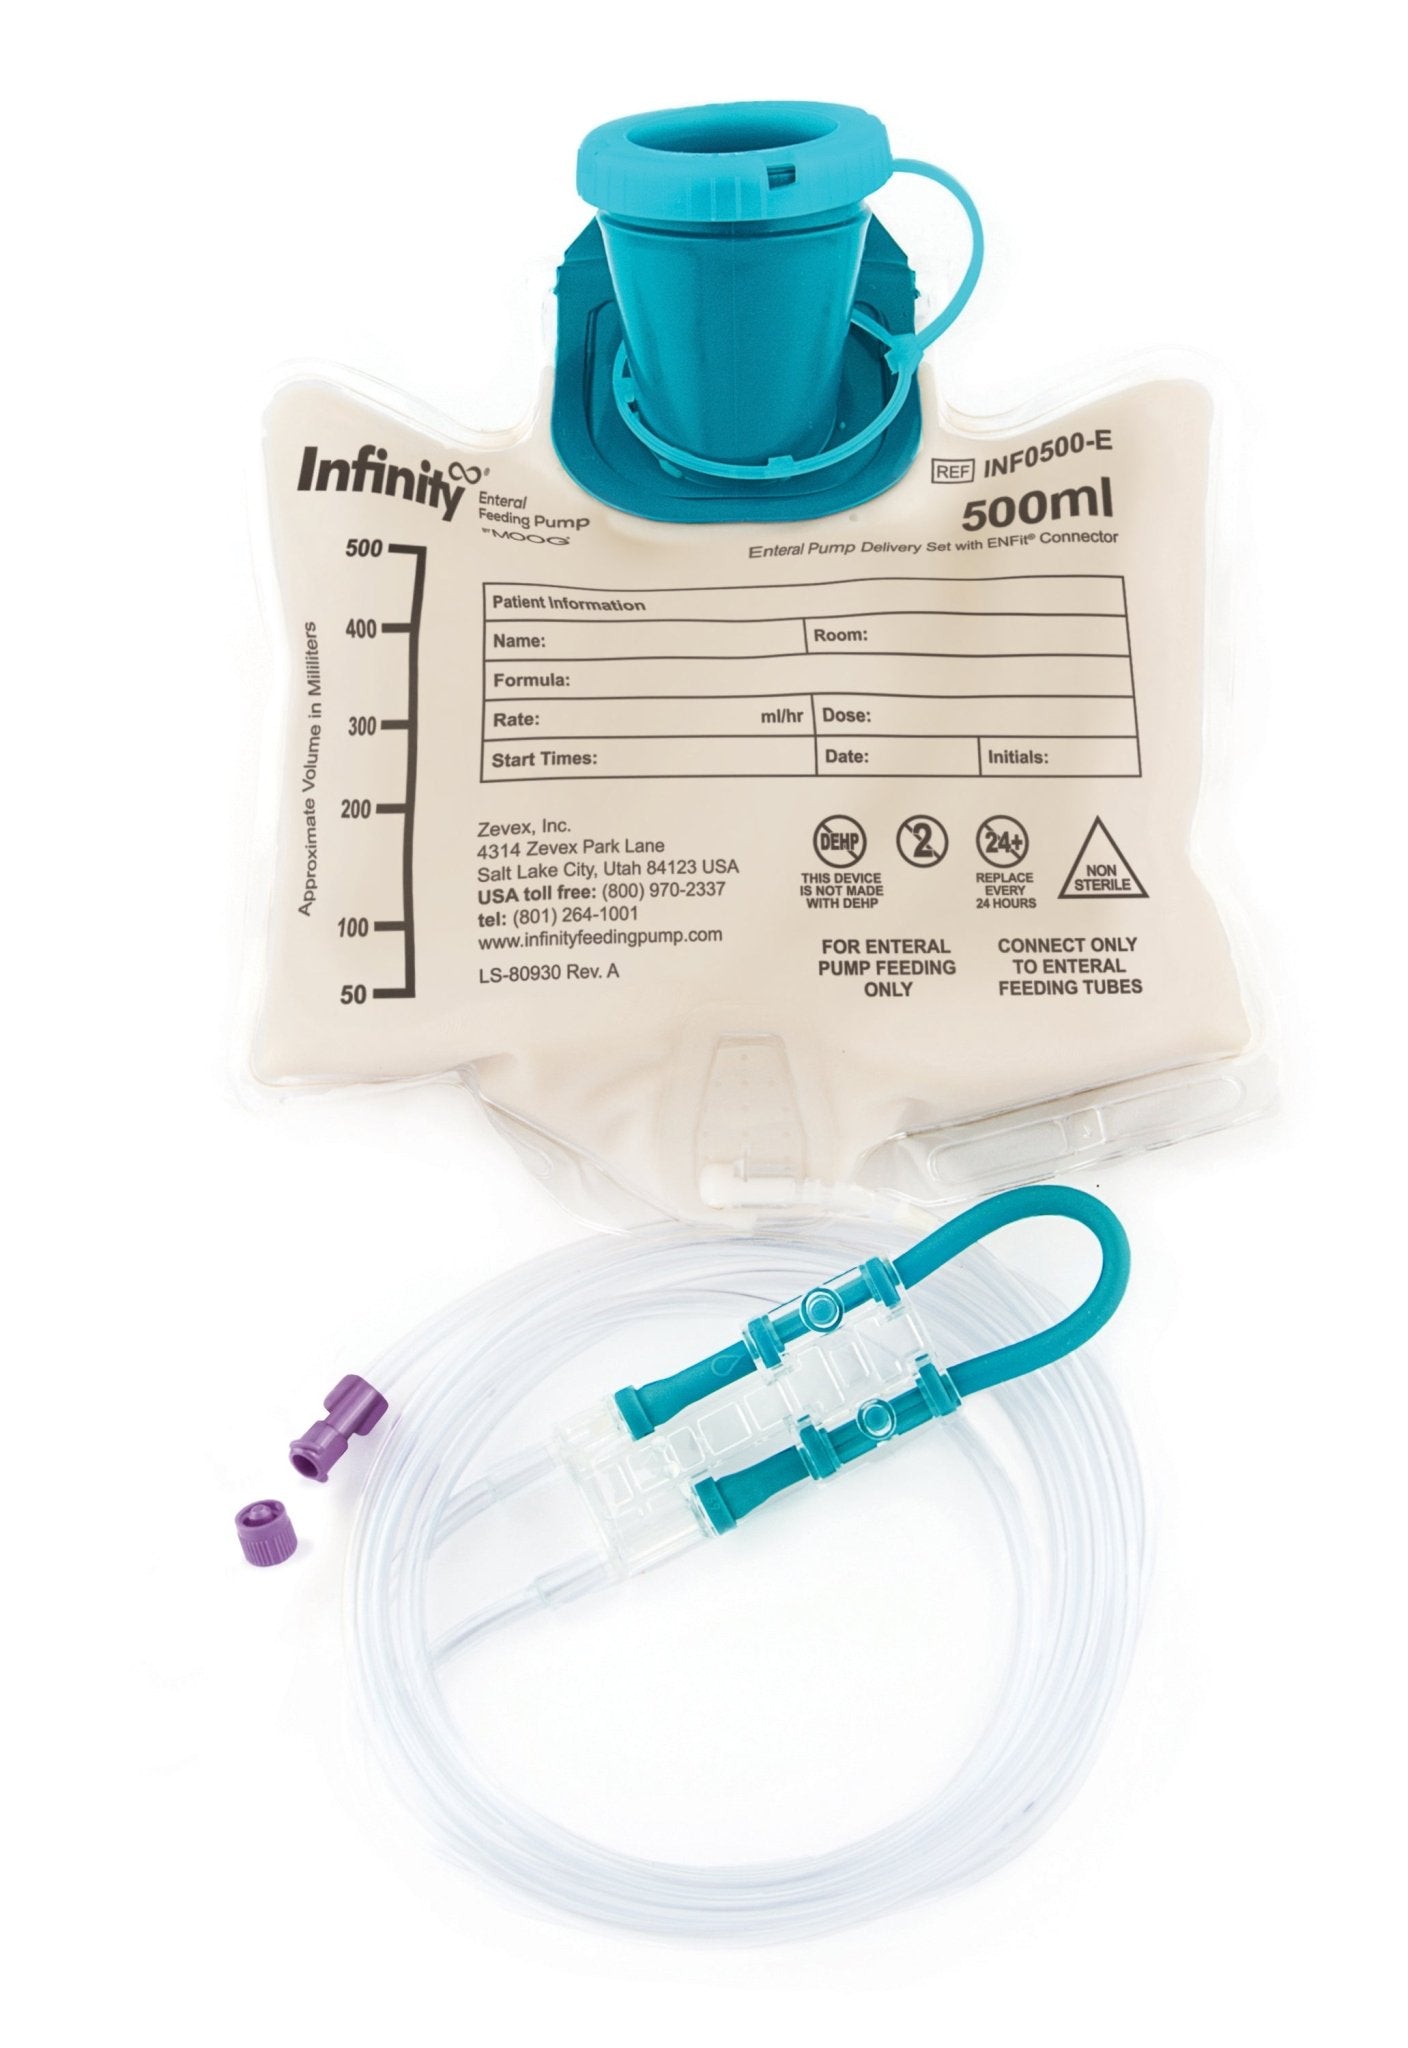 EA/1 - Infinity 500 mL Enteral Pump Delivery Set with ENFit Connector - Best Buy Medical Supplies